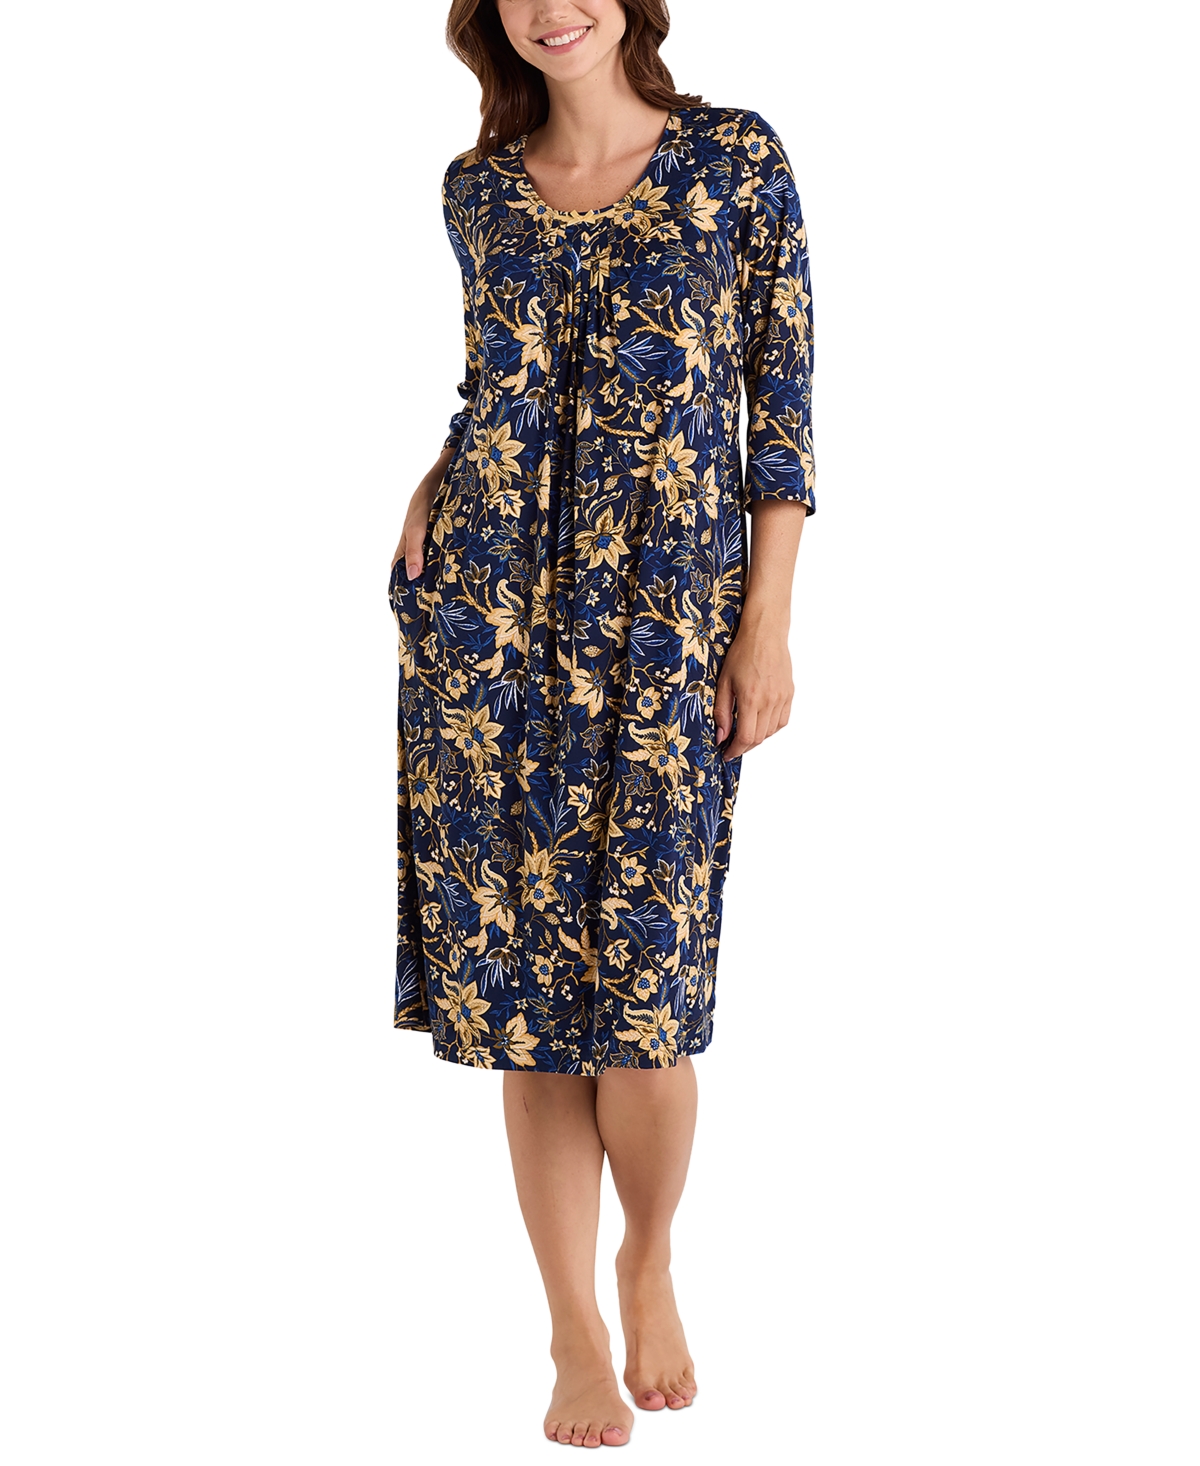 Women's Floral 3/4-Sleeve Nightgown - Navy Gold Print